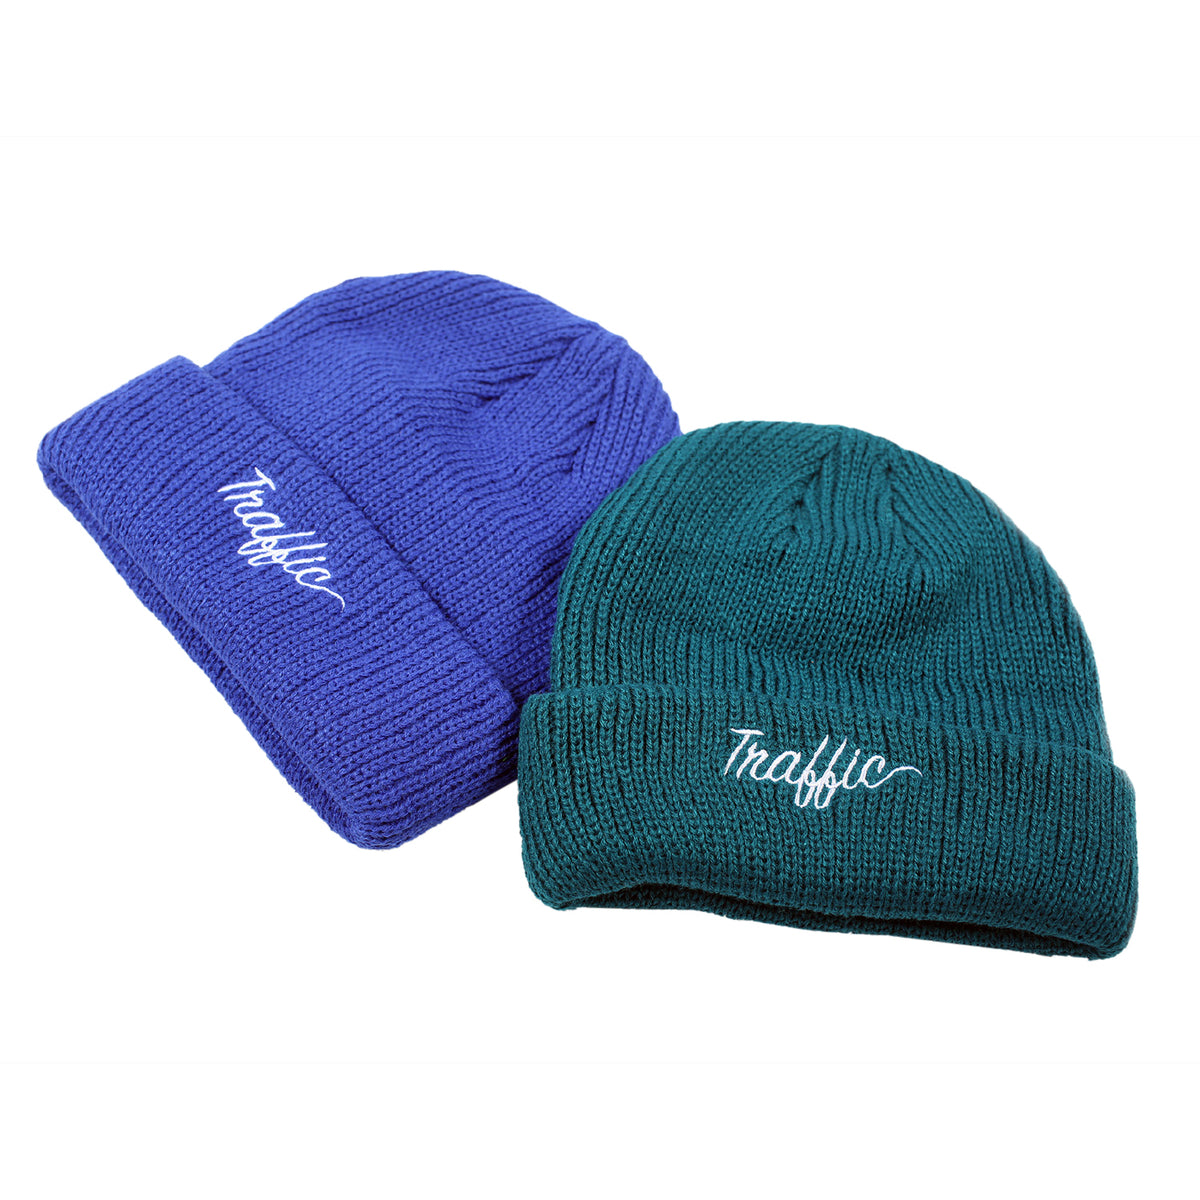 Traffic Skateboards Script Embroidered Beanie Spruce/Royal